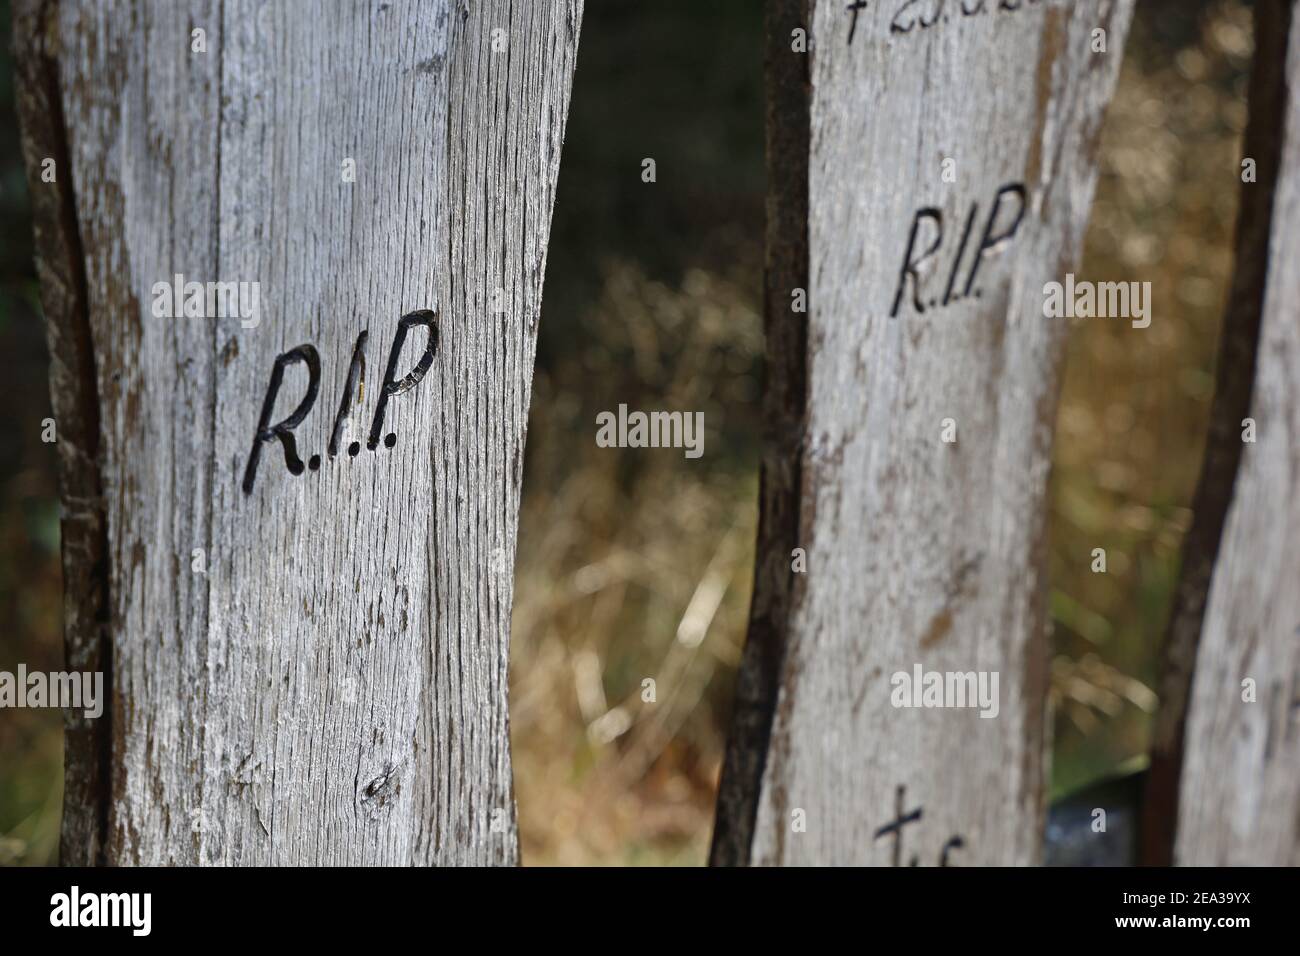 Rest in peace R.I.P. engraved on old wooden board Stock Photo